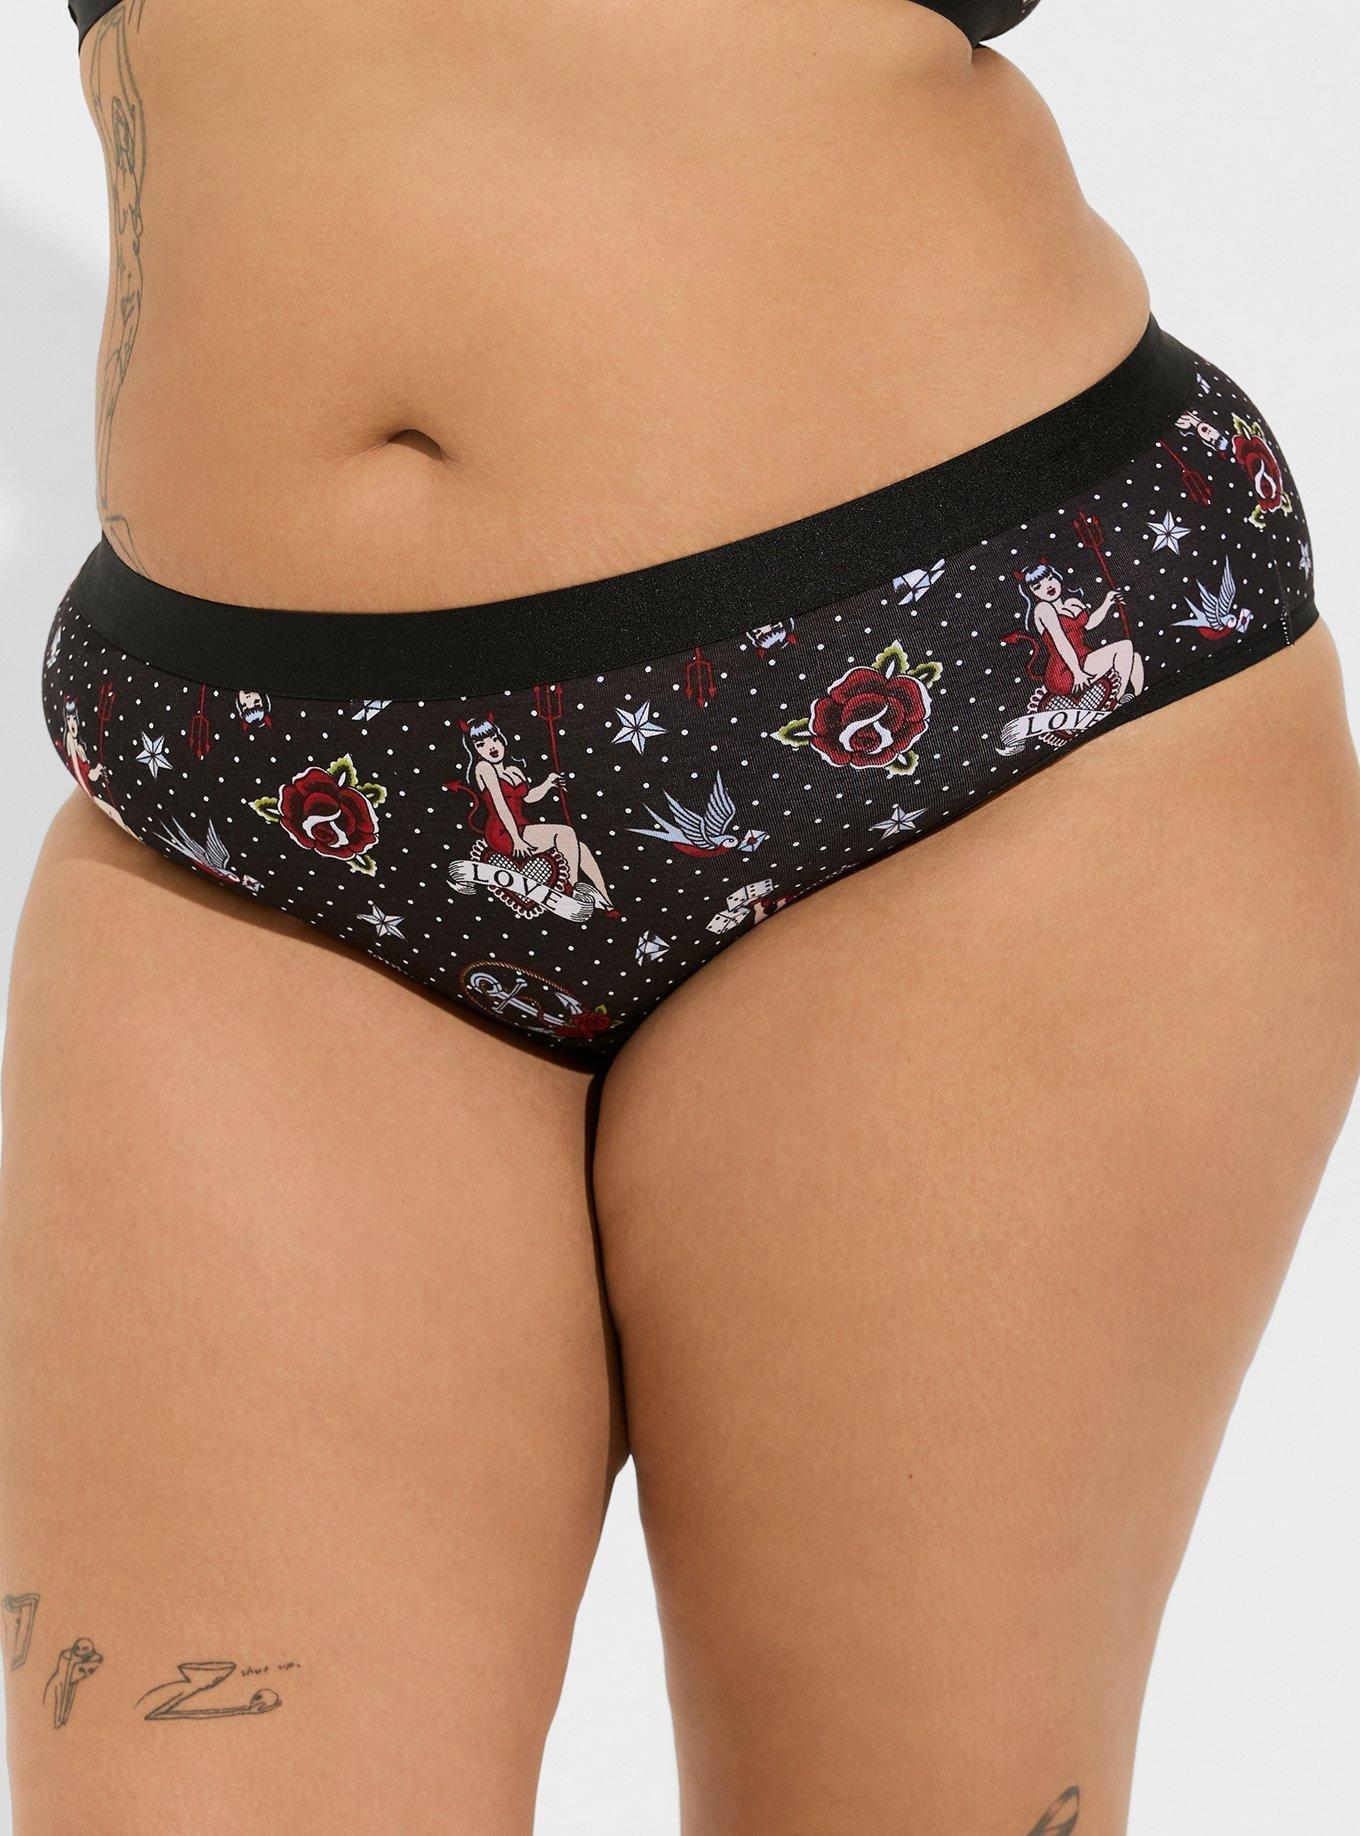 Hipster Panty | Full Coverage & Mid Waist -Pack Of 3-Colors And Print May  Vary - MULTI COLOR / S